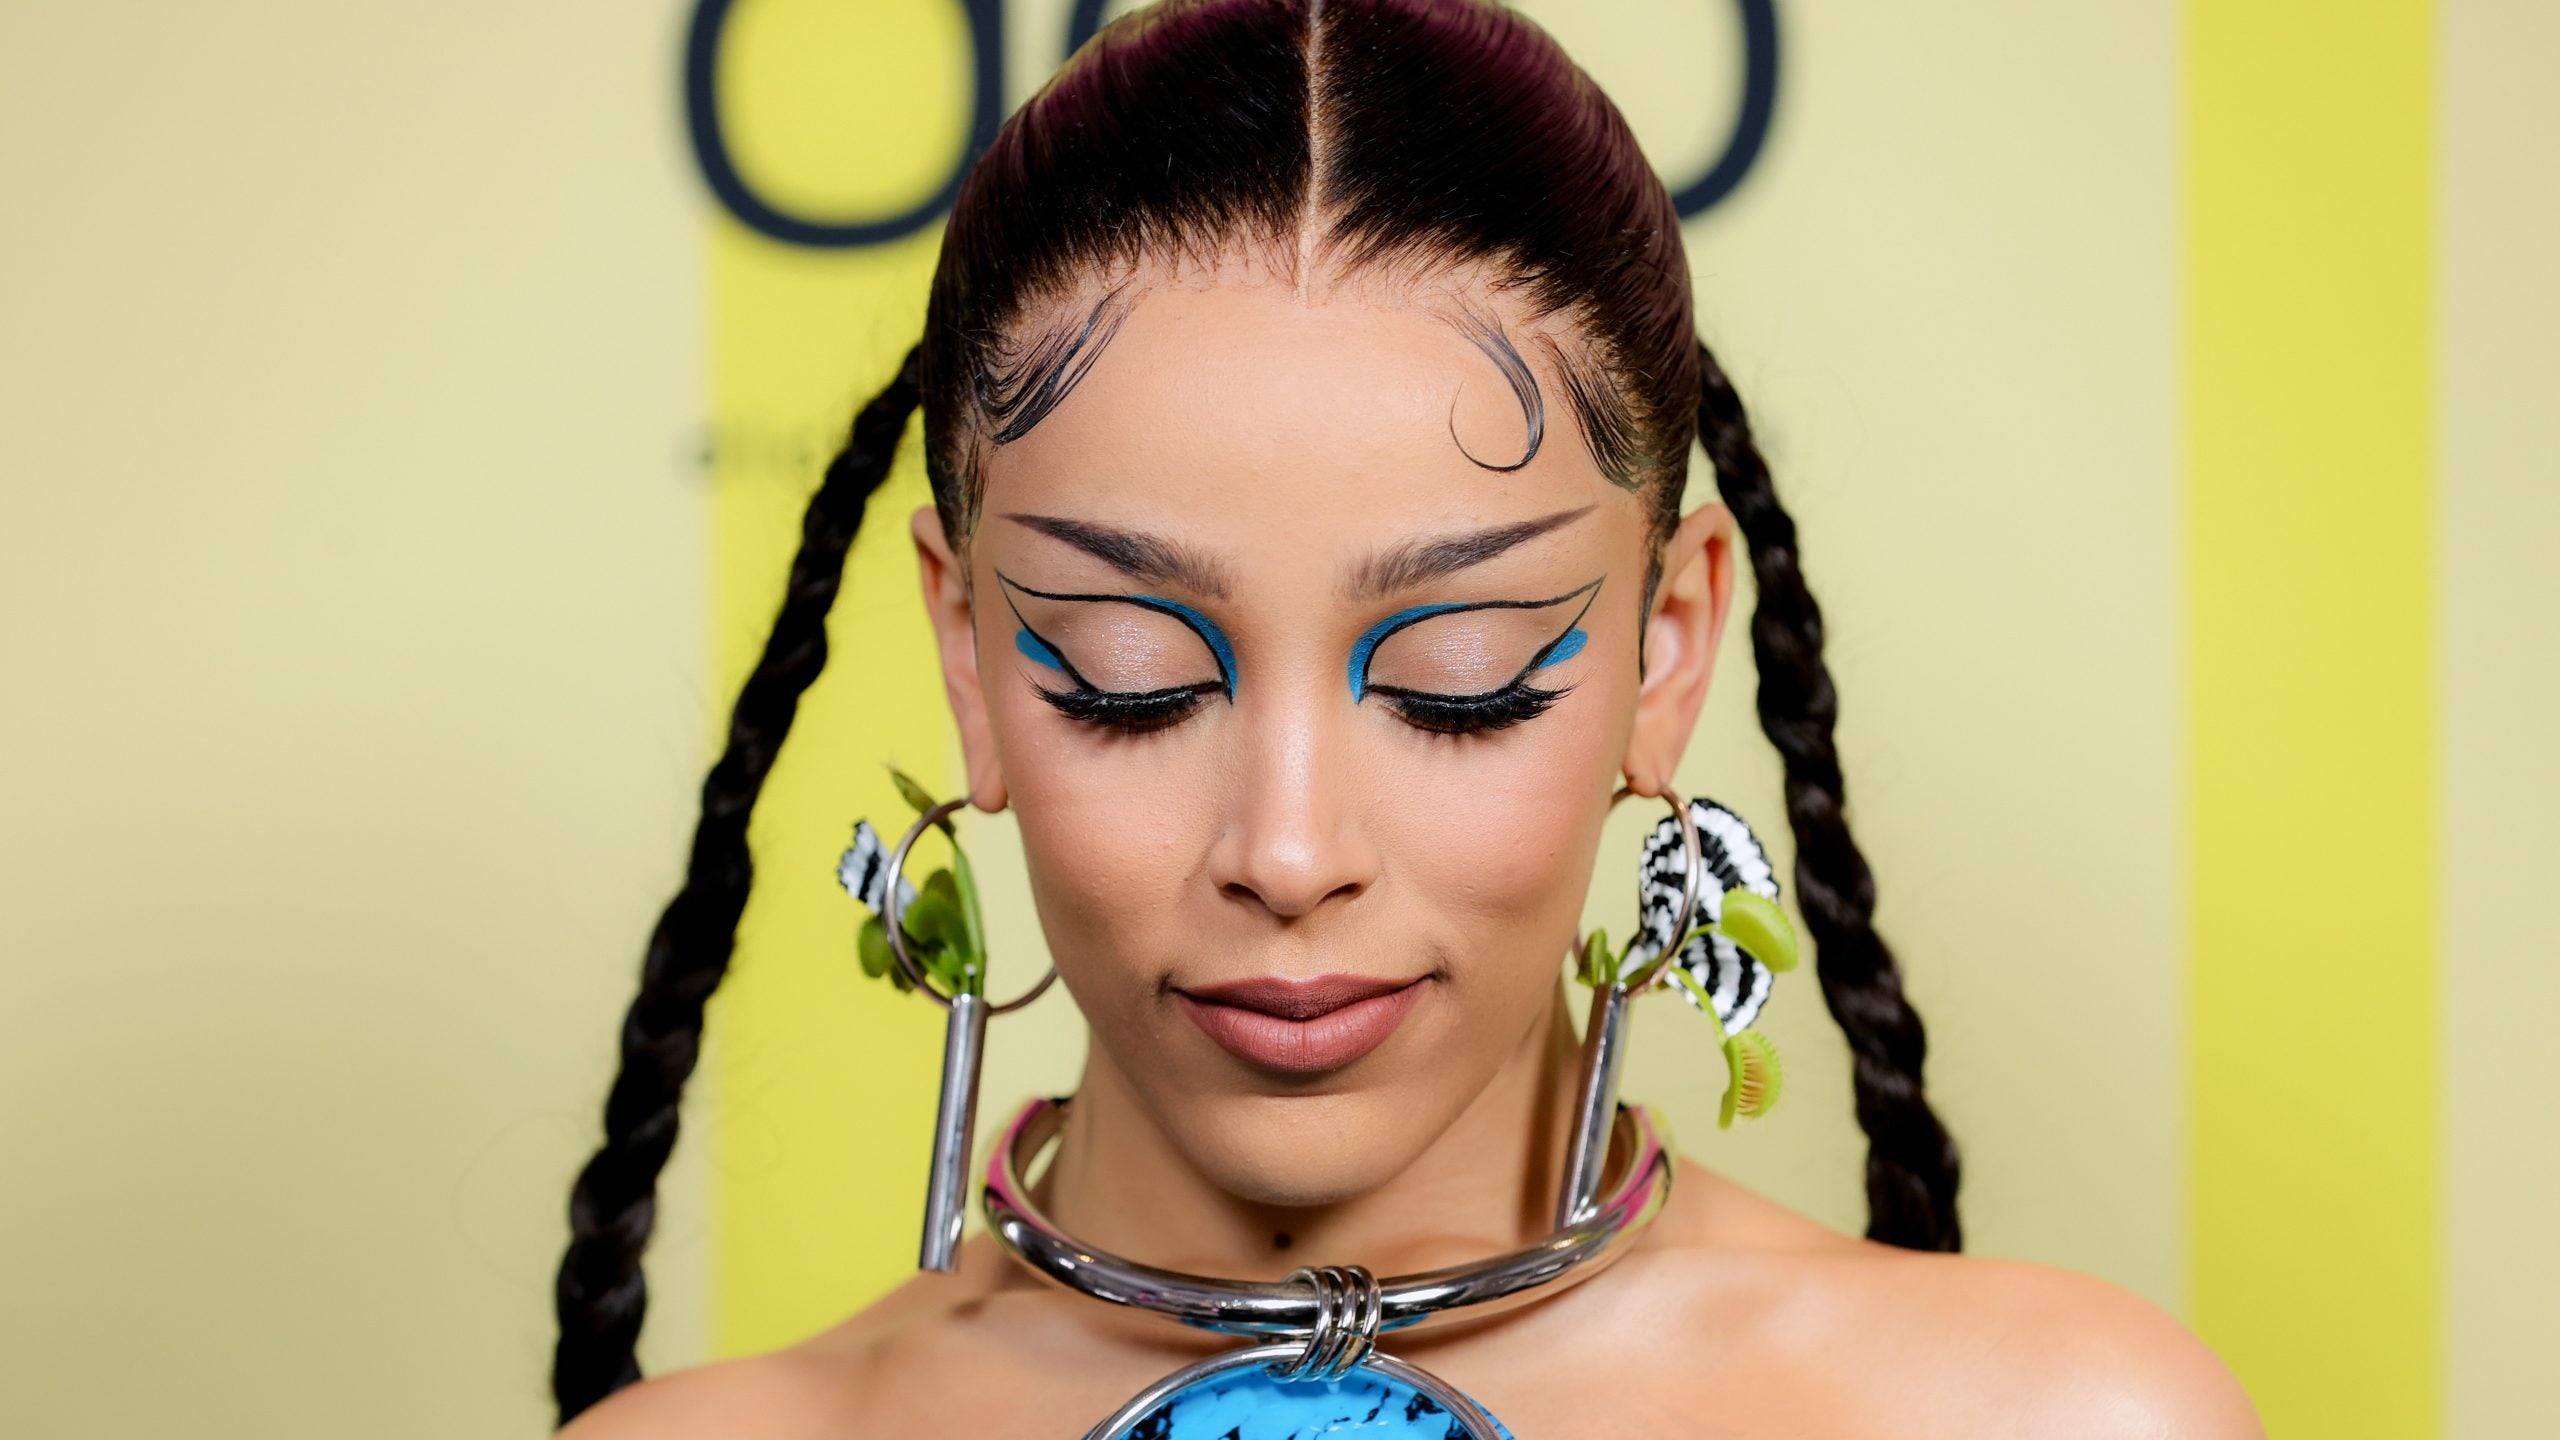 Doja Cat's 2021 Billboard Music Awards Hair Look Was Inspired By "Afro-Futurism"